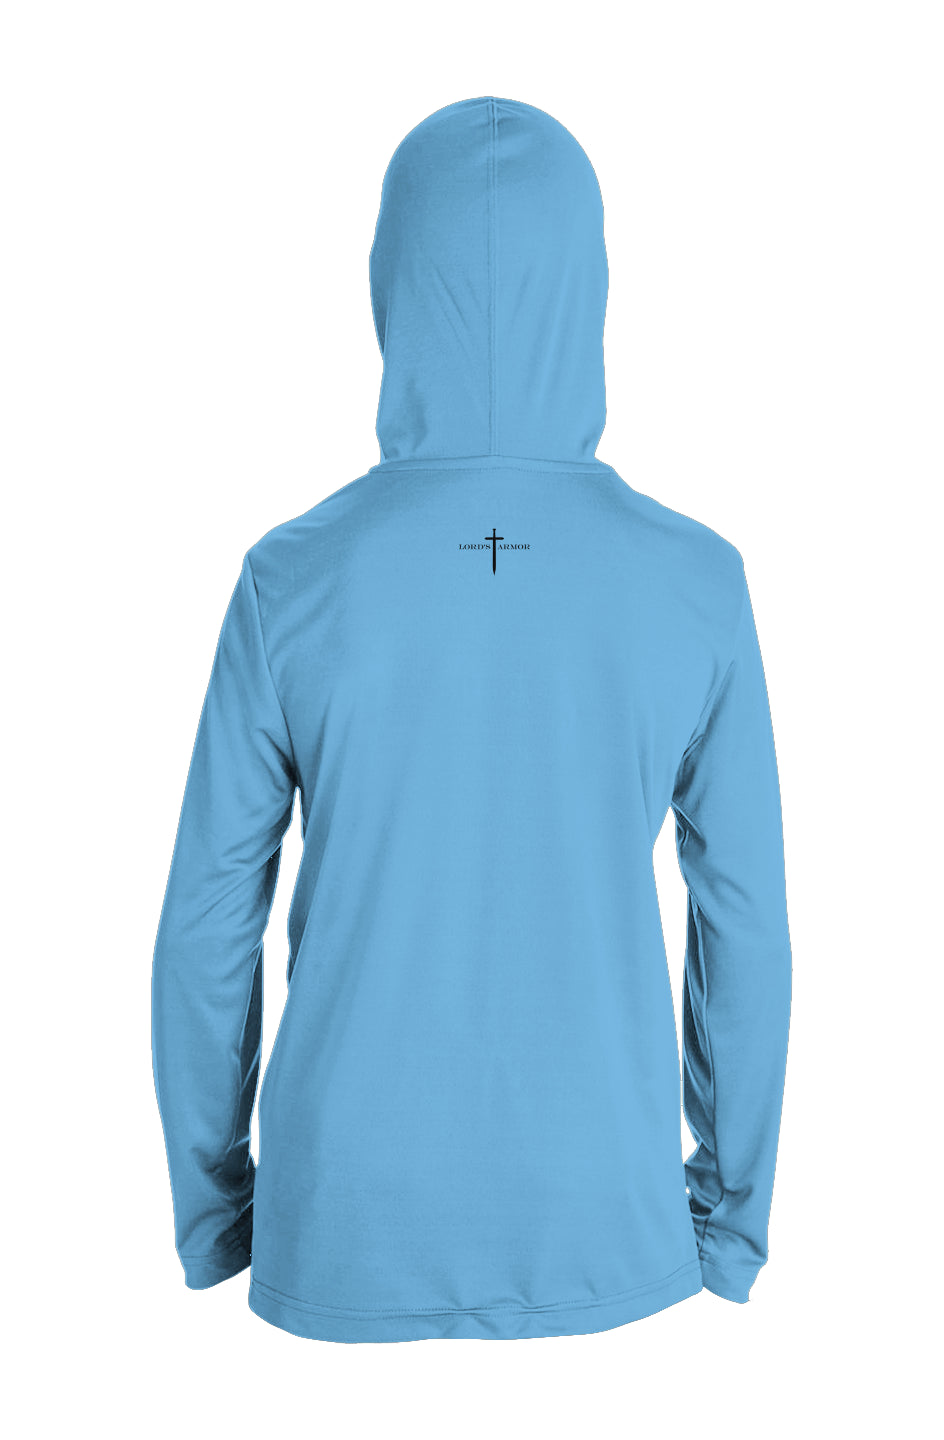 Youth Hooded Performance Long Sleeve